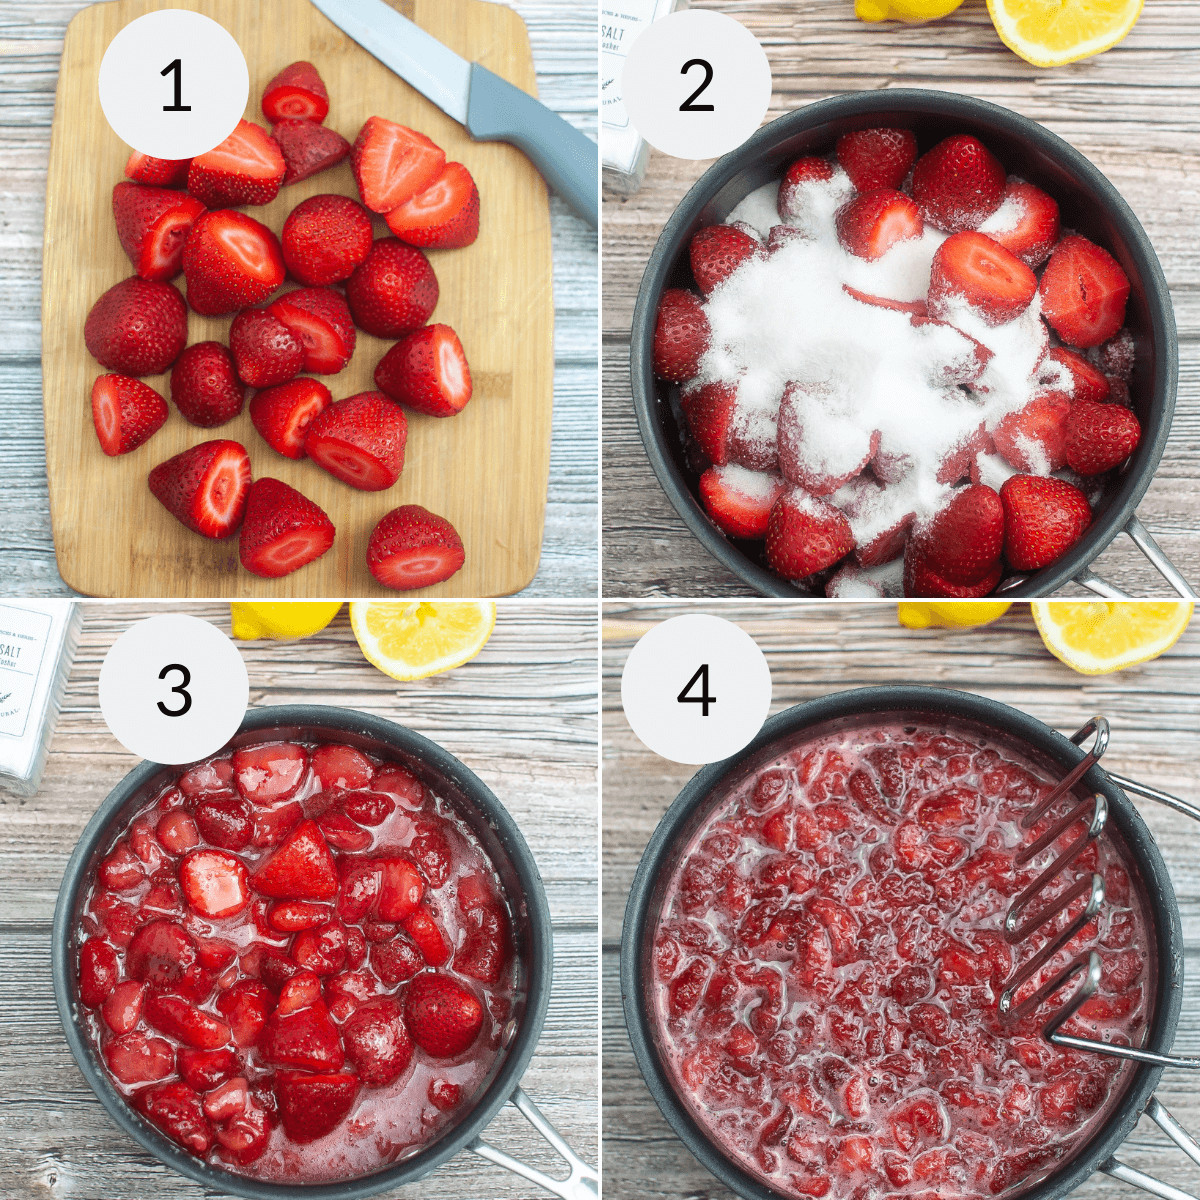 A series of photos showing how to make the jelly.